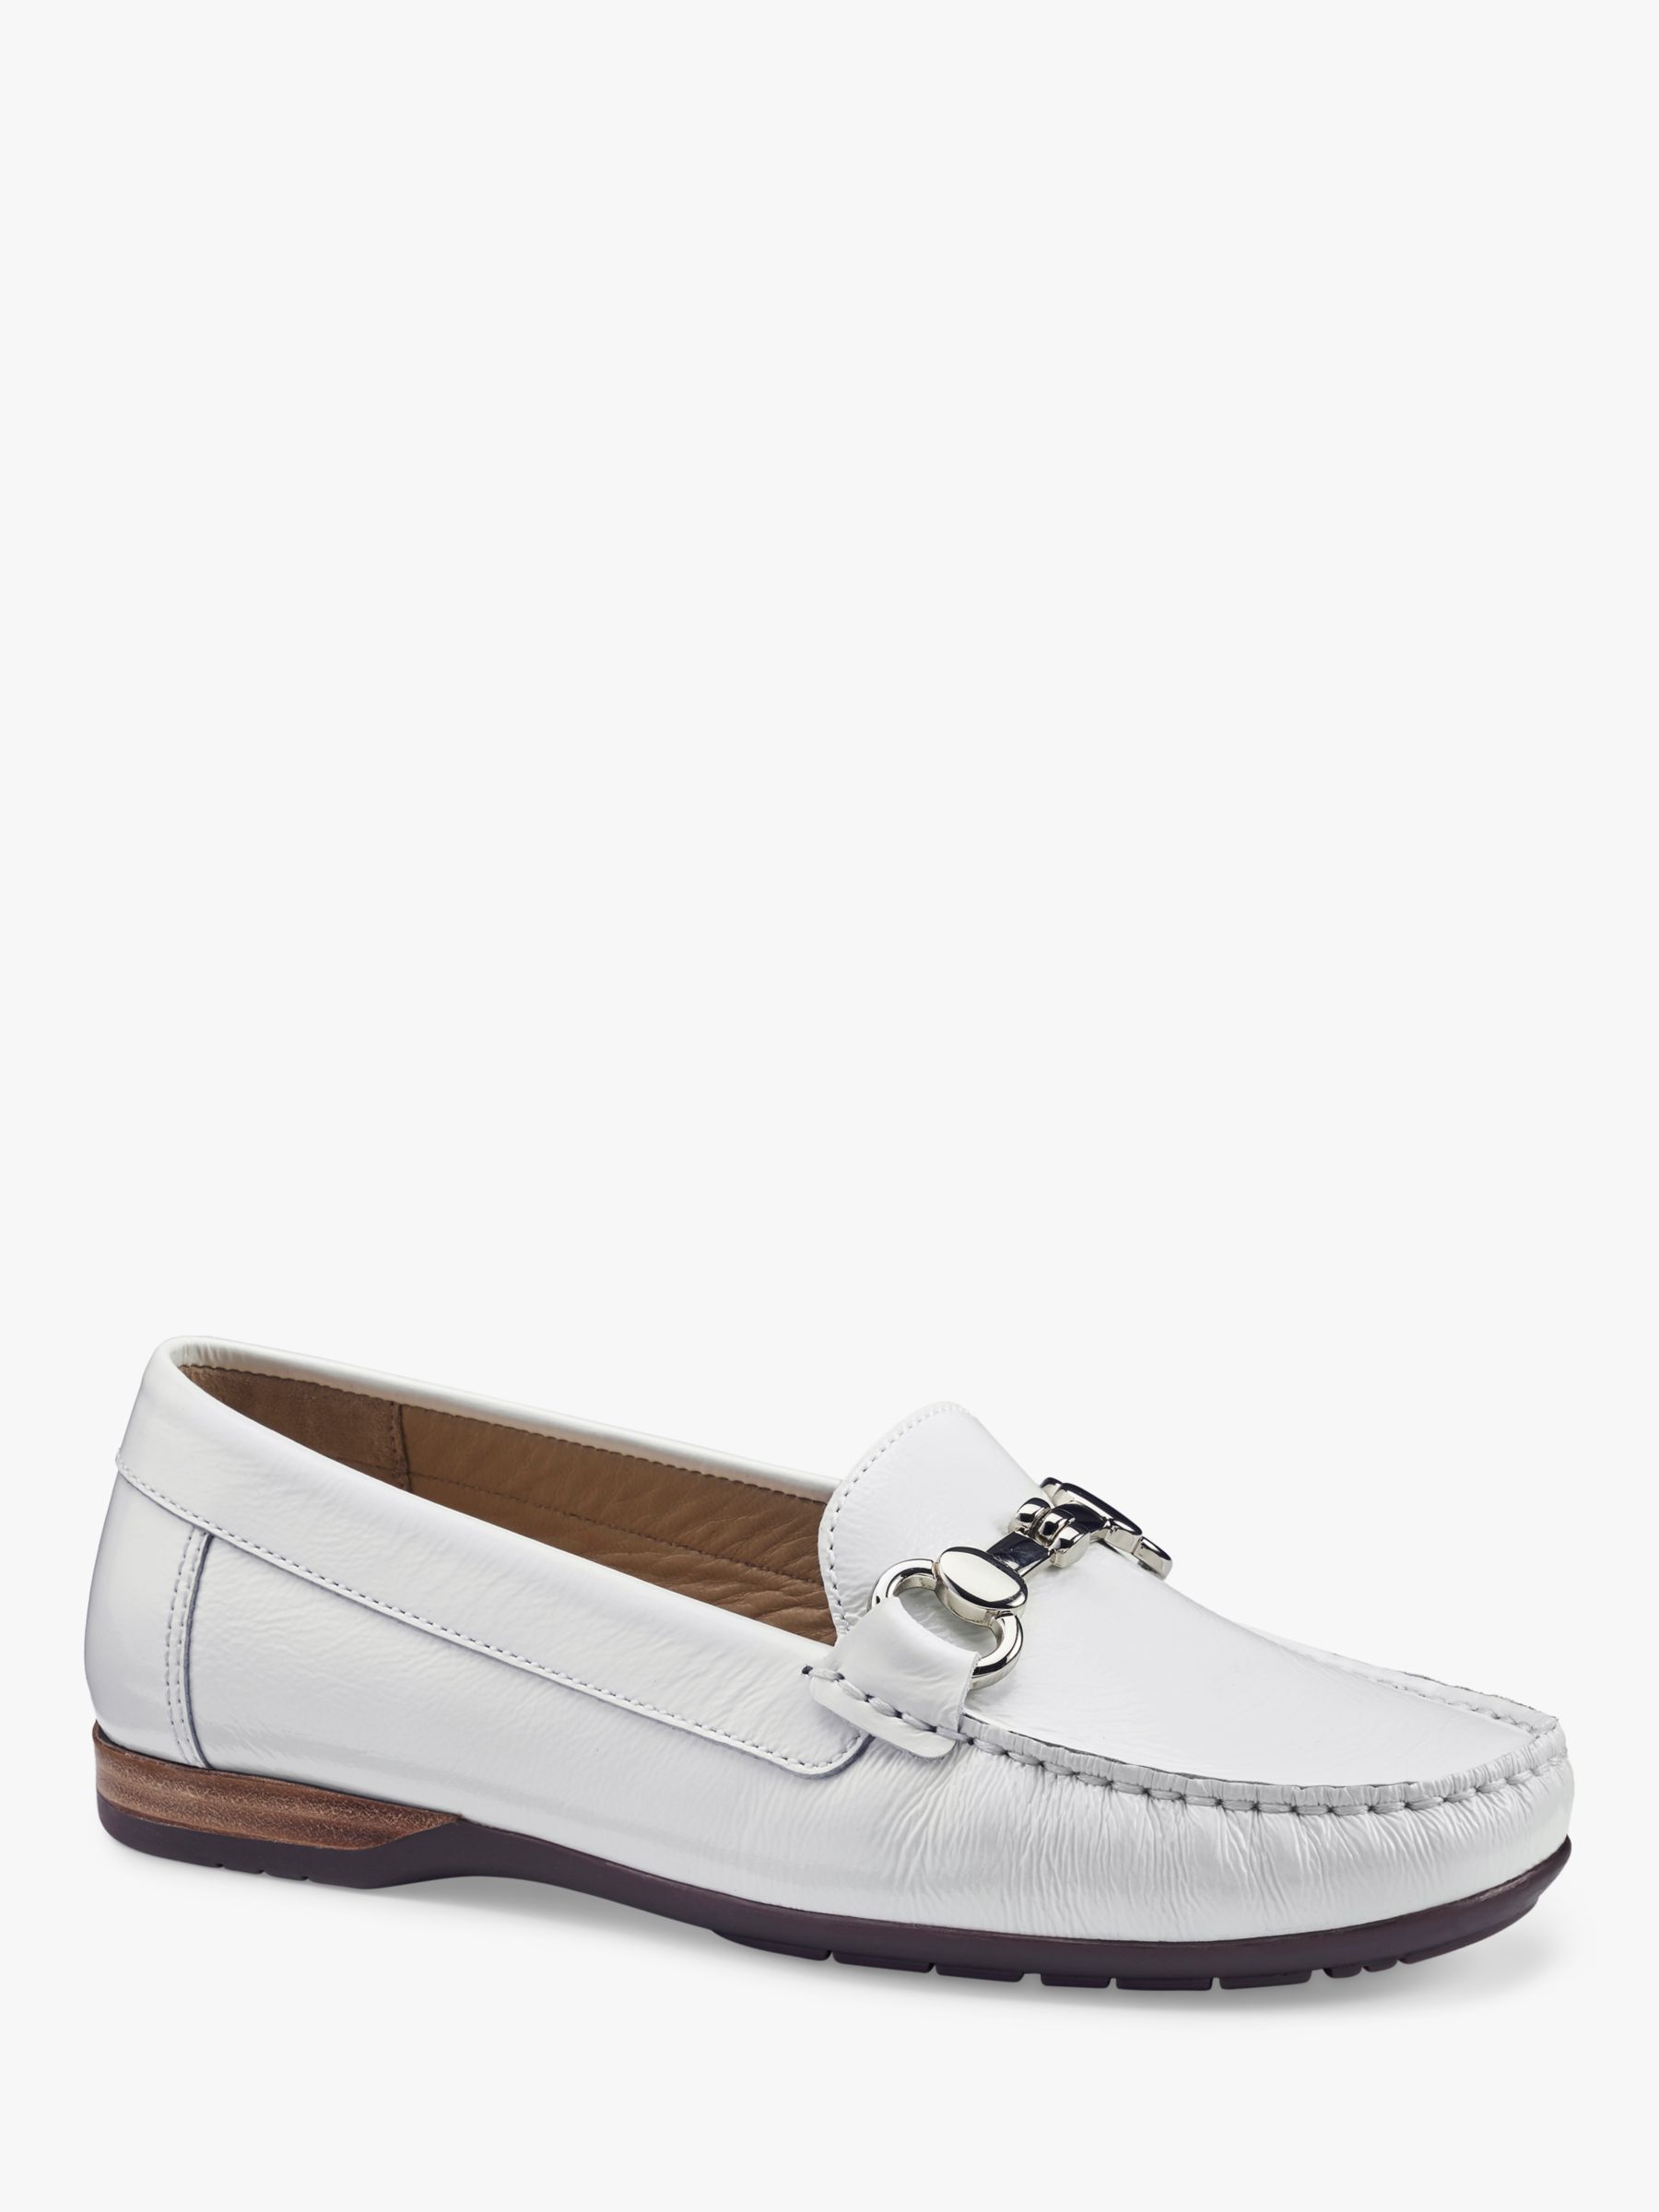 Hotter Pearl Premium Moccasins, White, 9